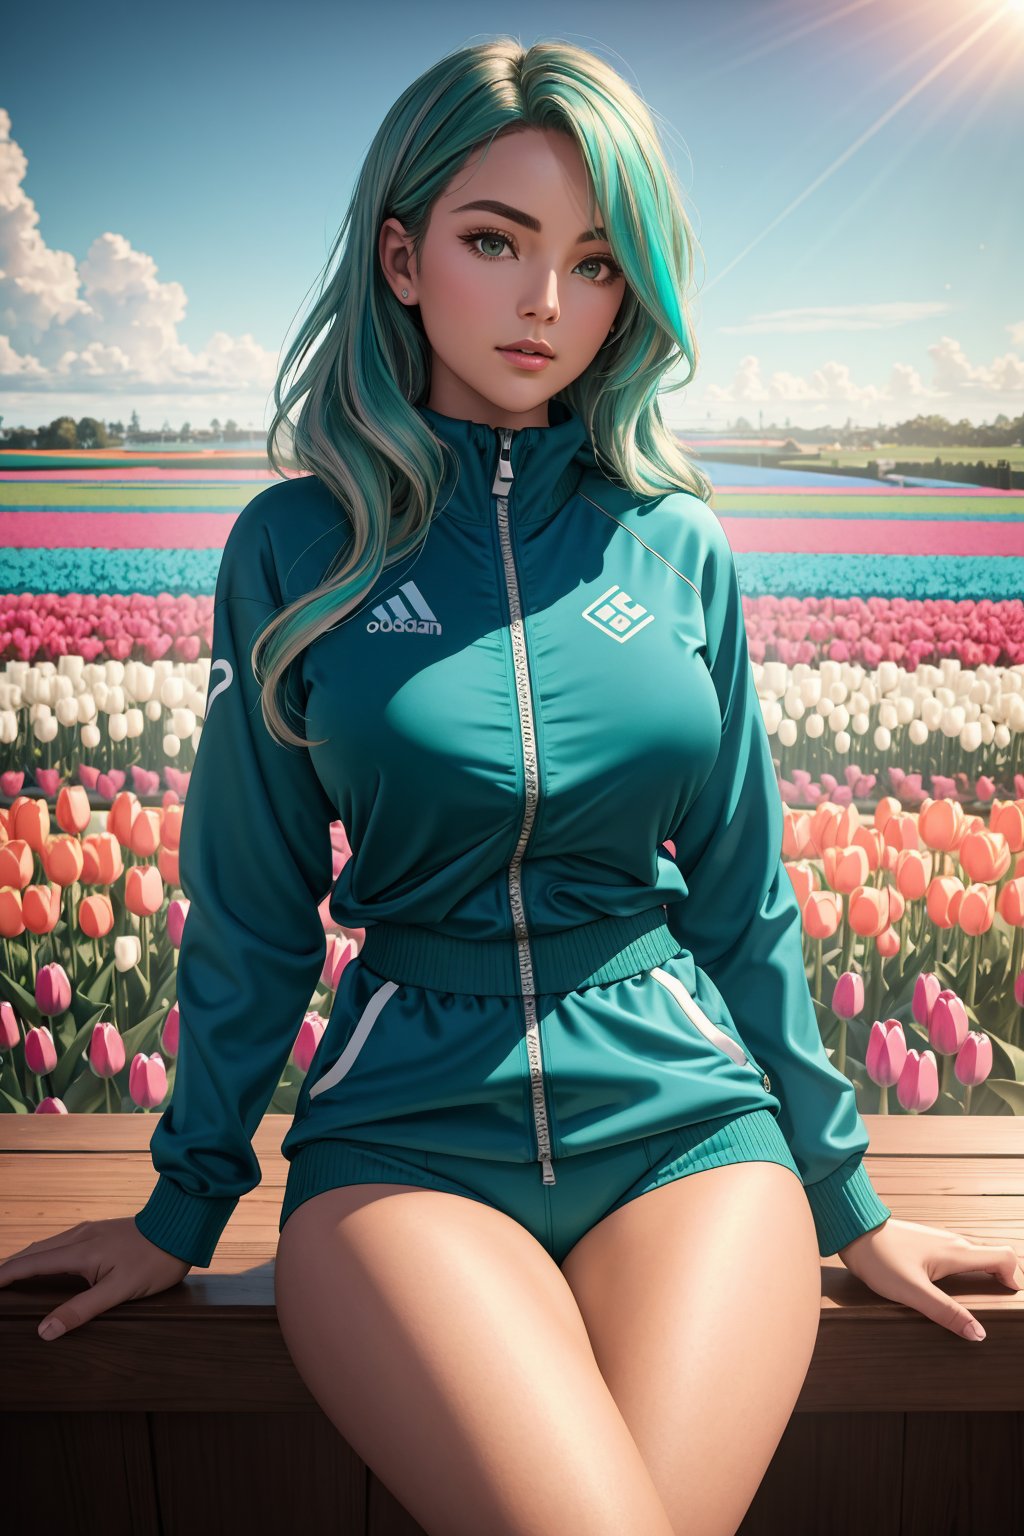 masterpiece of photorealism, photorealistic highly detailed professional 8k raw photography, best hyperrealistic quality, volumetric real-time lighting and shadows, Zoom Out Shot Photography, Interstellar Explorer, Hourglass: Balanced proportions with a well-defined waist, similar bust and hip measurements,  **Velour Tracksuit for a Sporty and Comfortable Look**, Ocean Wave Blue and Seafoam Green Balayage, Seated Elegance: Sitting gracefully, emphasizing posture and poise., Aerial Views of Colorful Tulip Fields full of busy people